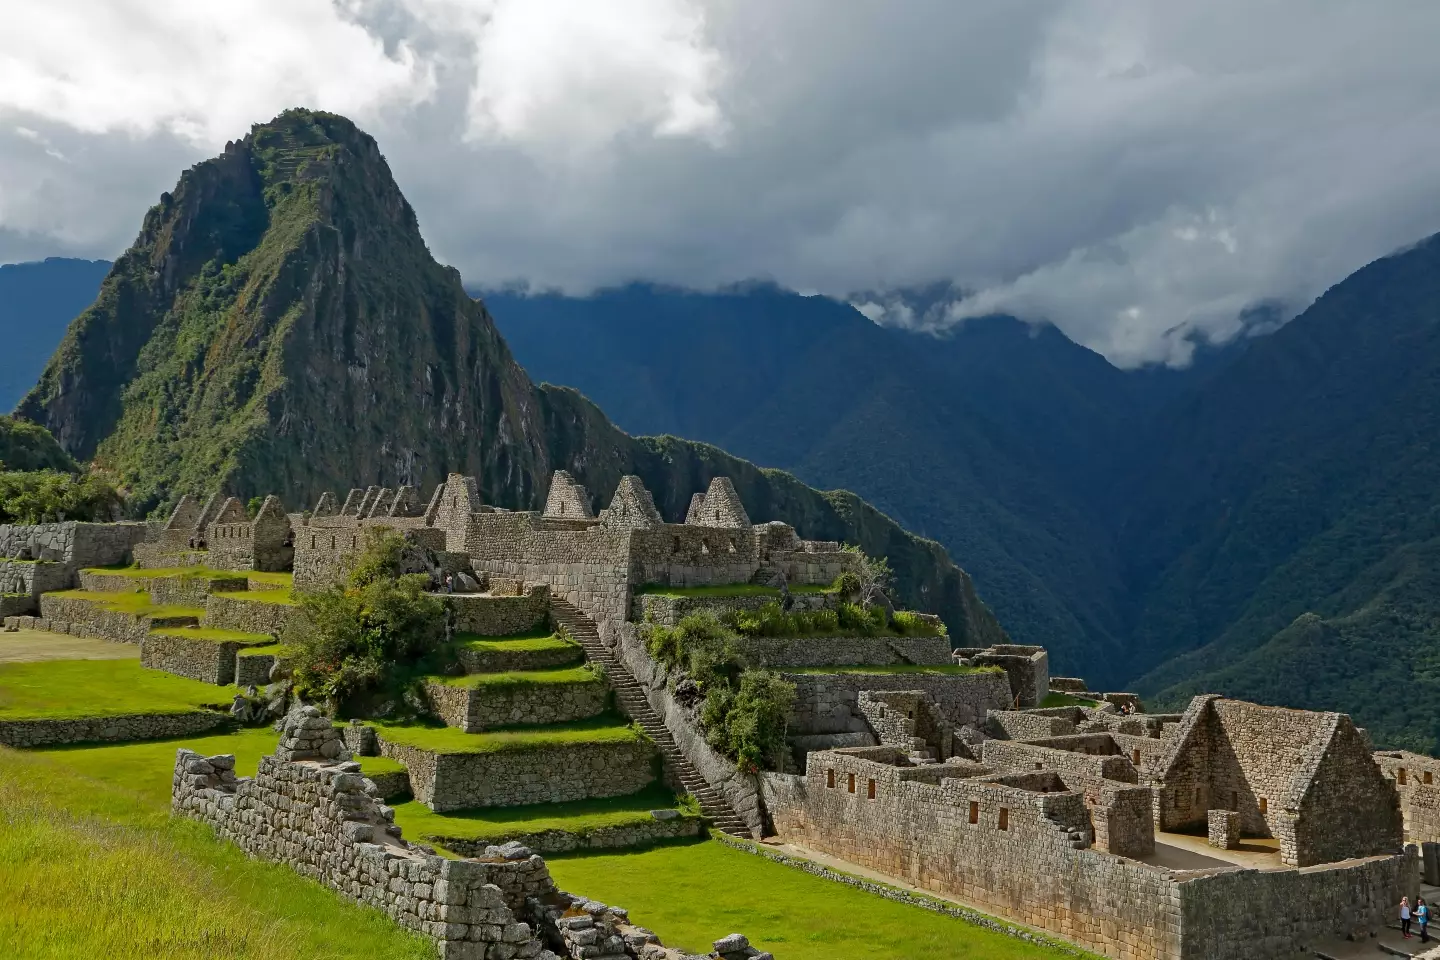 The Inca citadel is a popular tourist attraction.